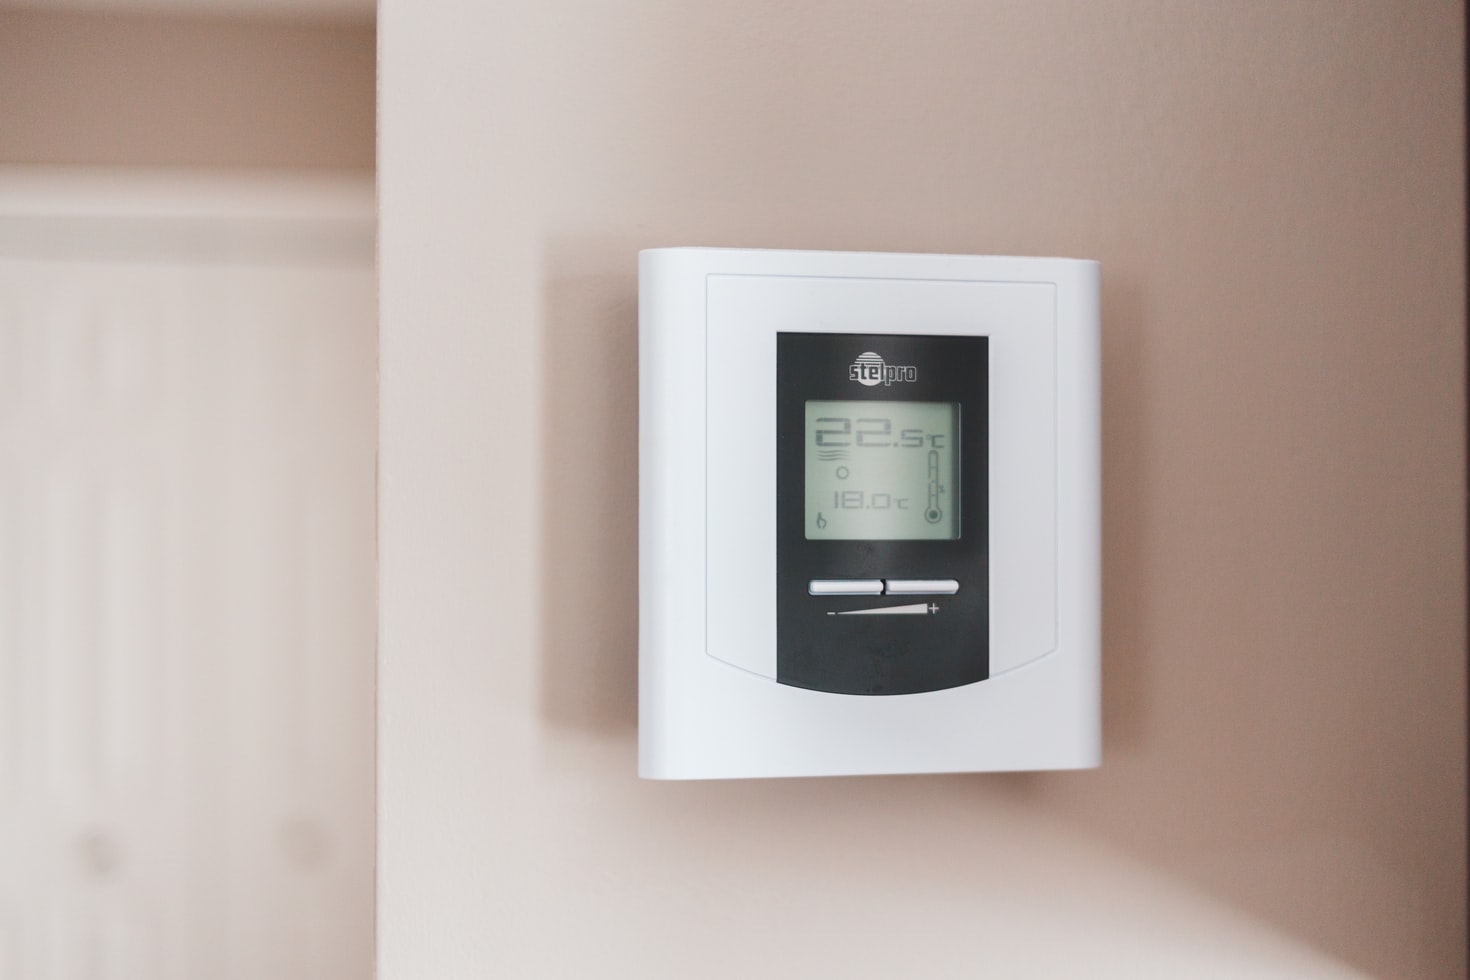 7 Common Signs a Heating System May Need Urgent Repairs